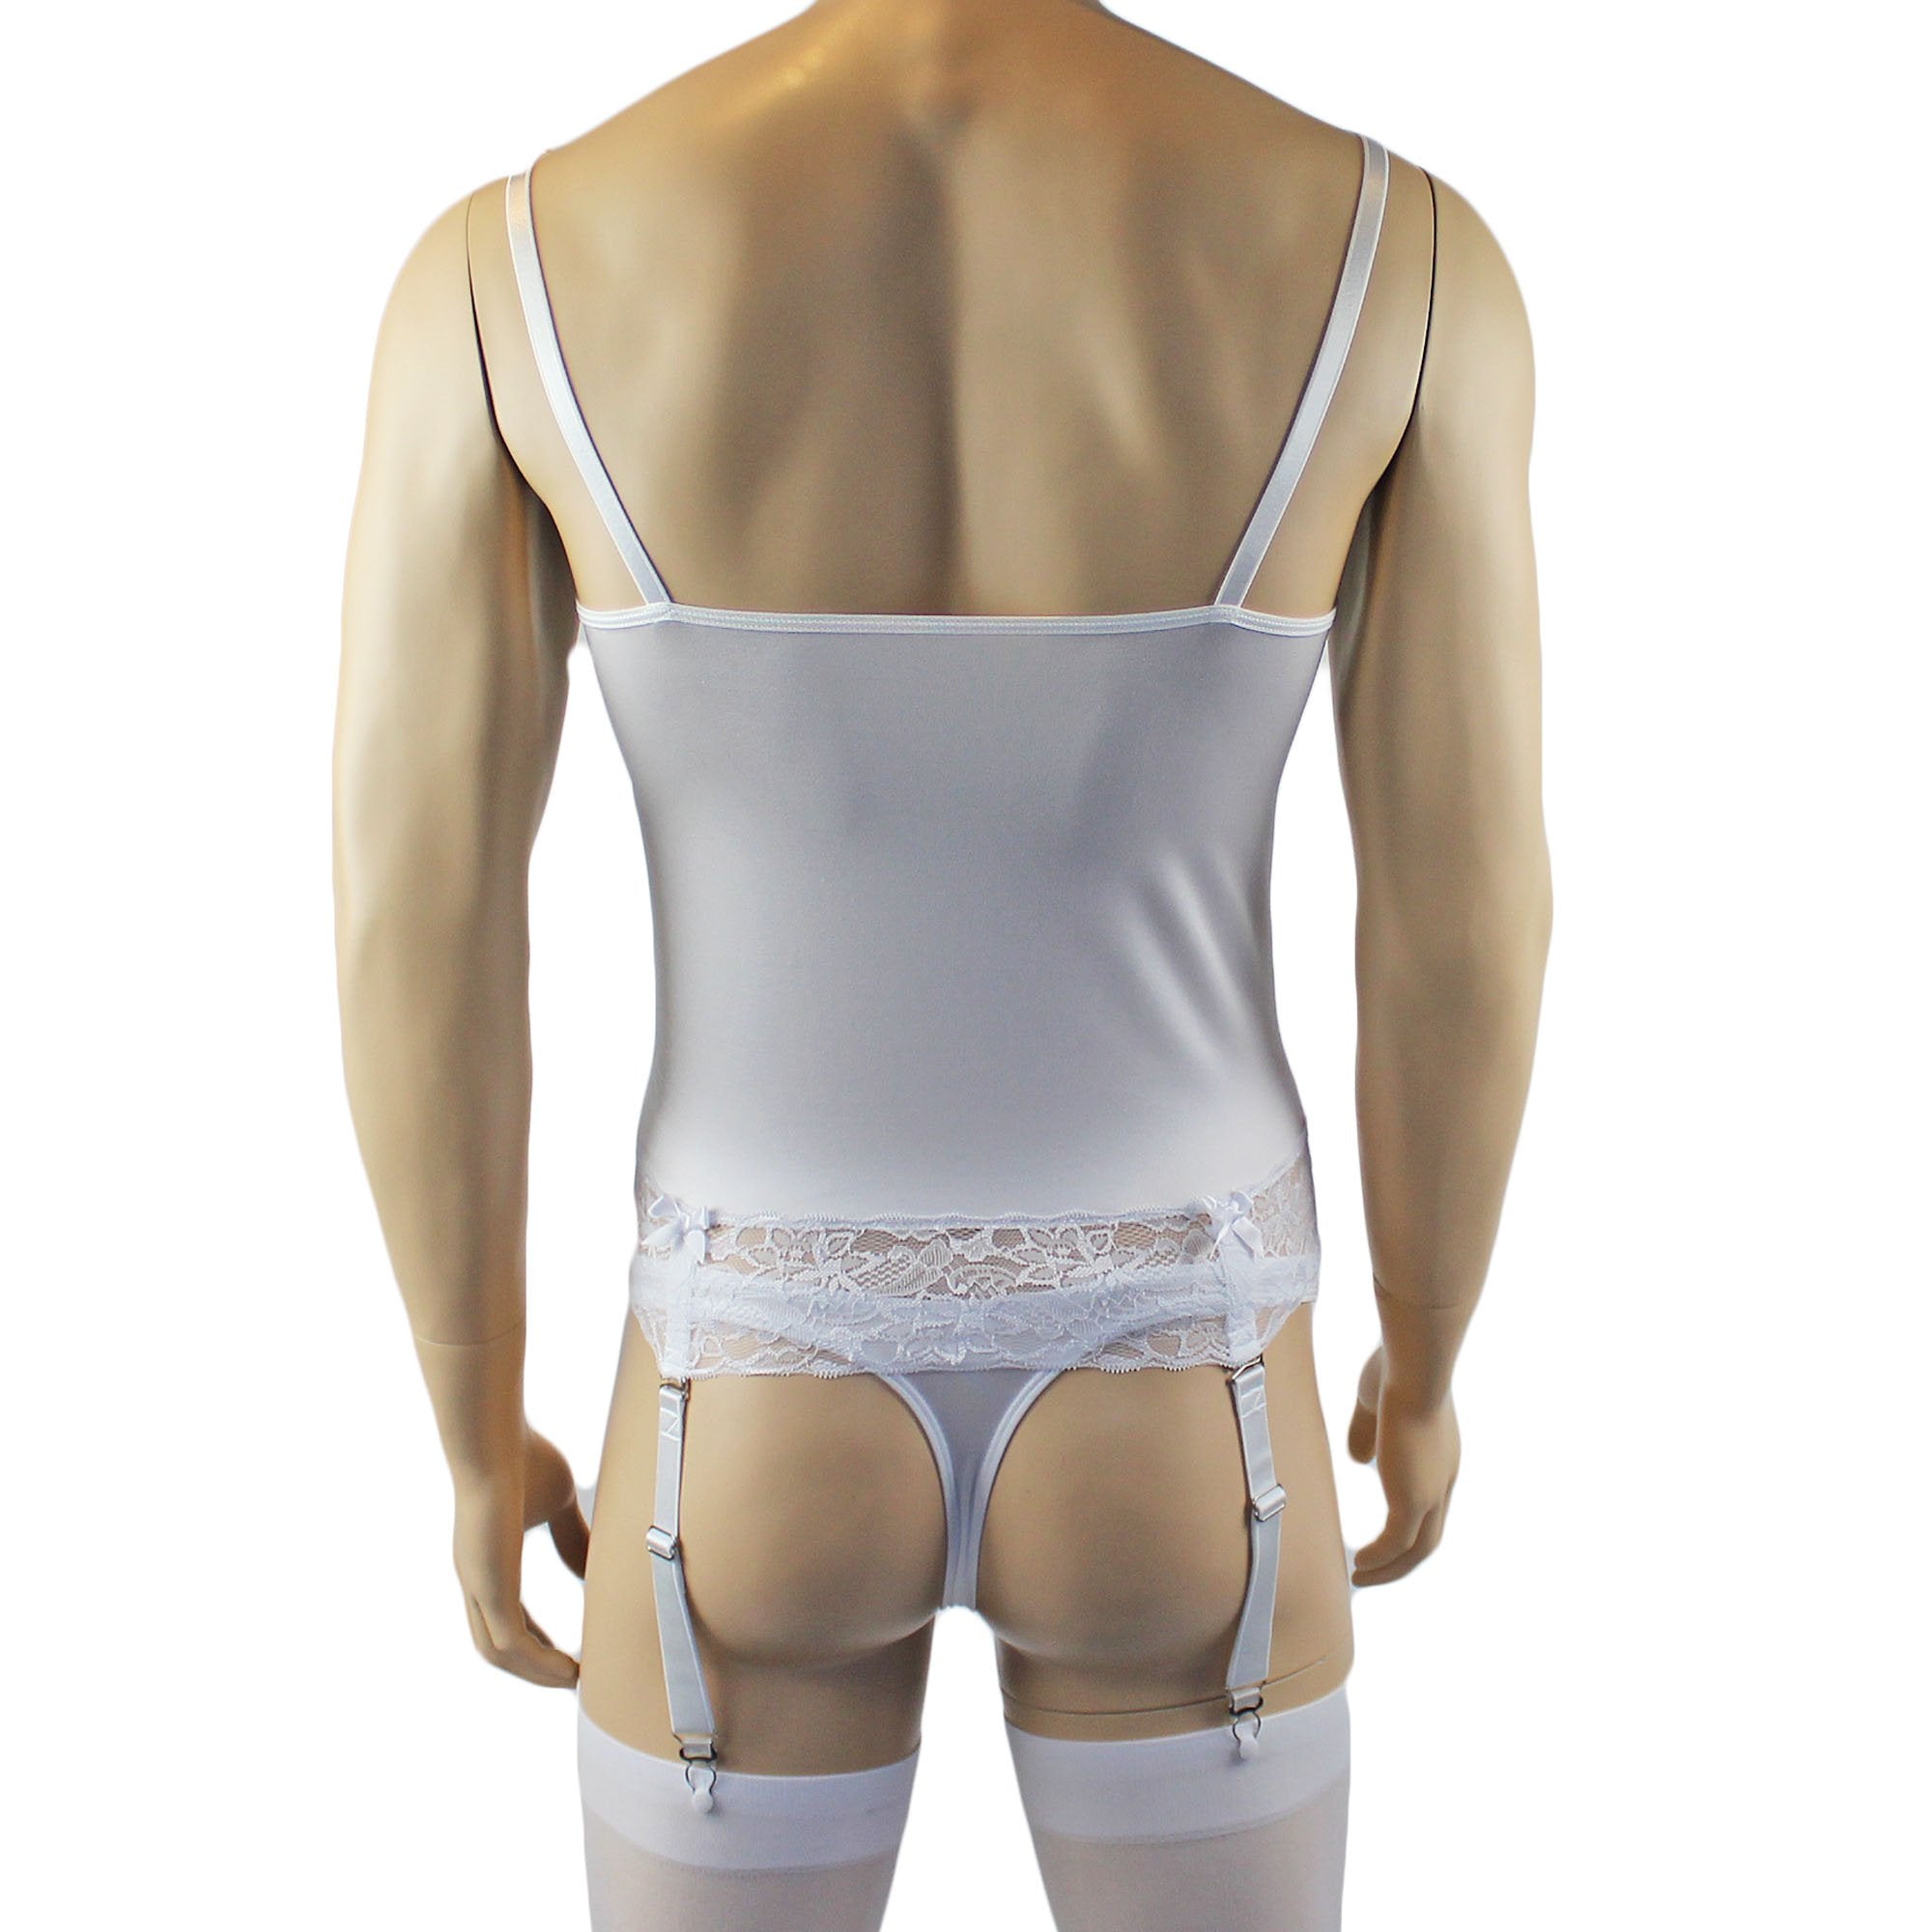 Male Romance Stretch Spandex Corset Camisole Top & Thong for Lingerie Men White or Black